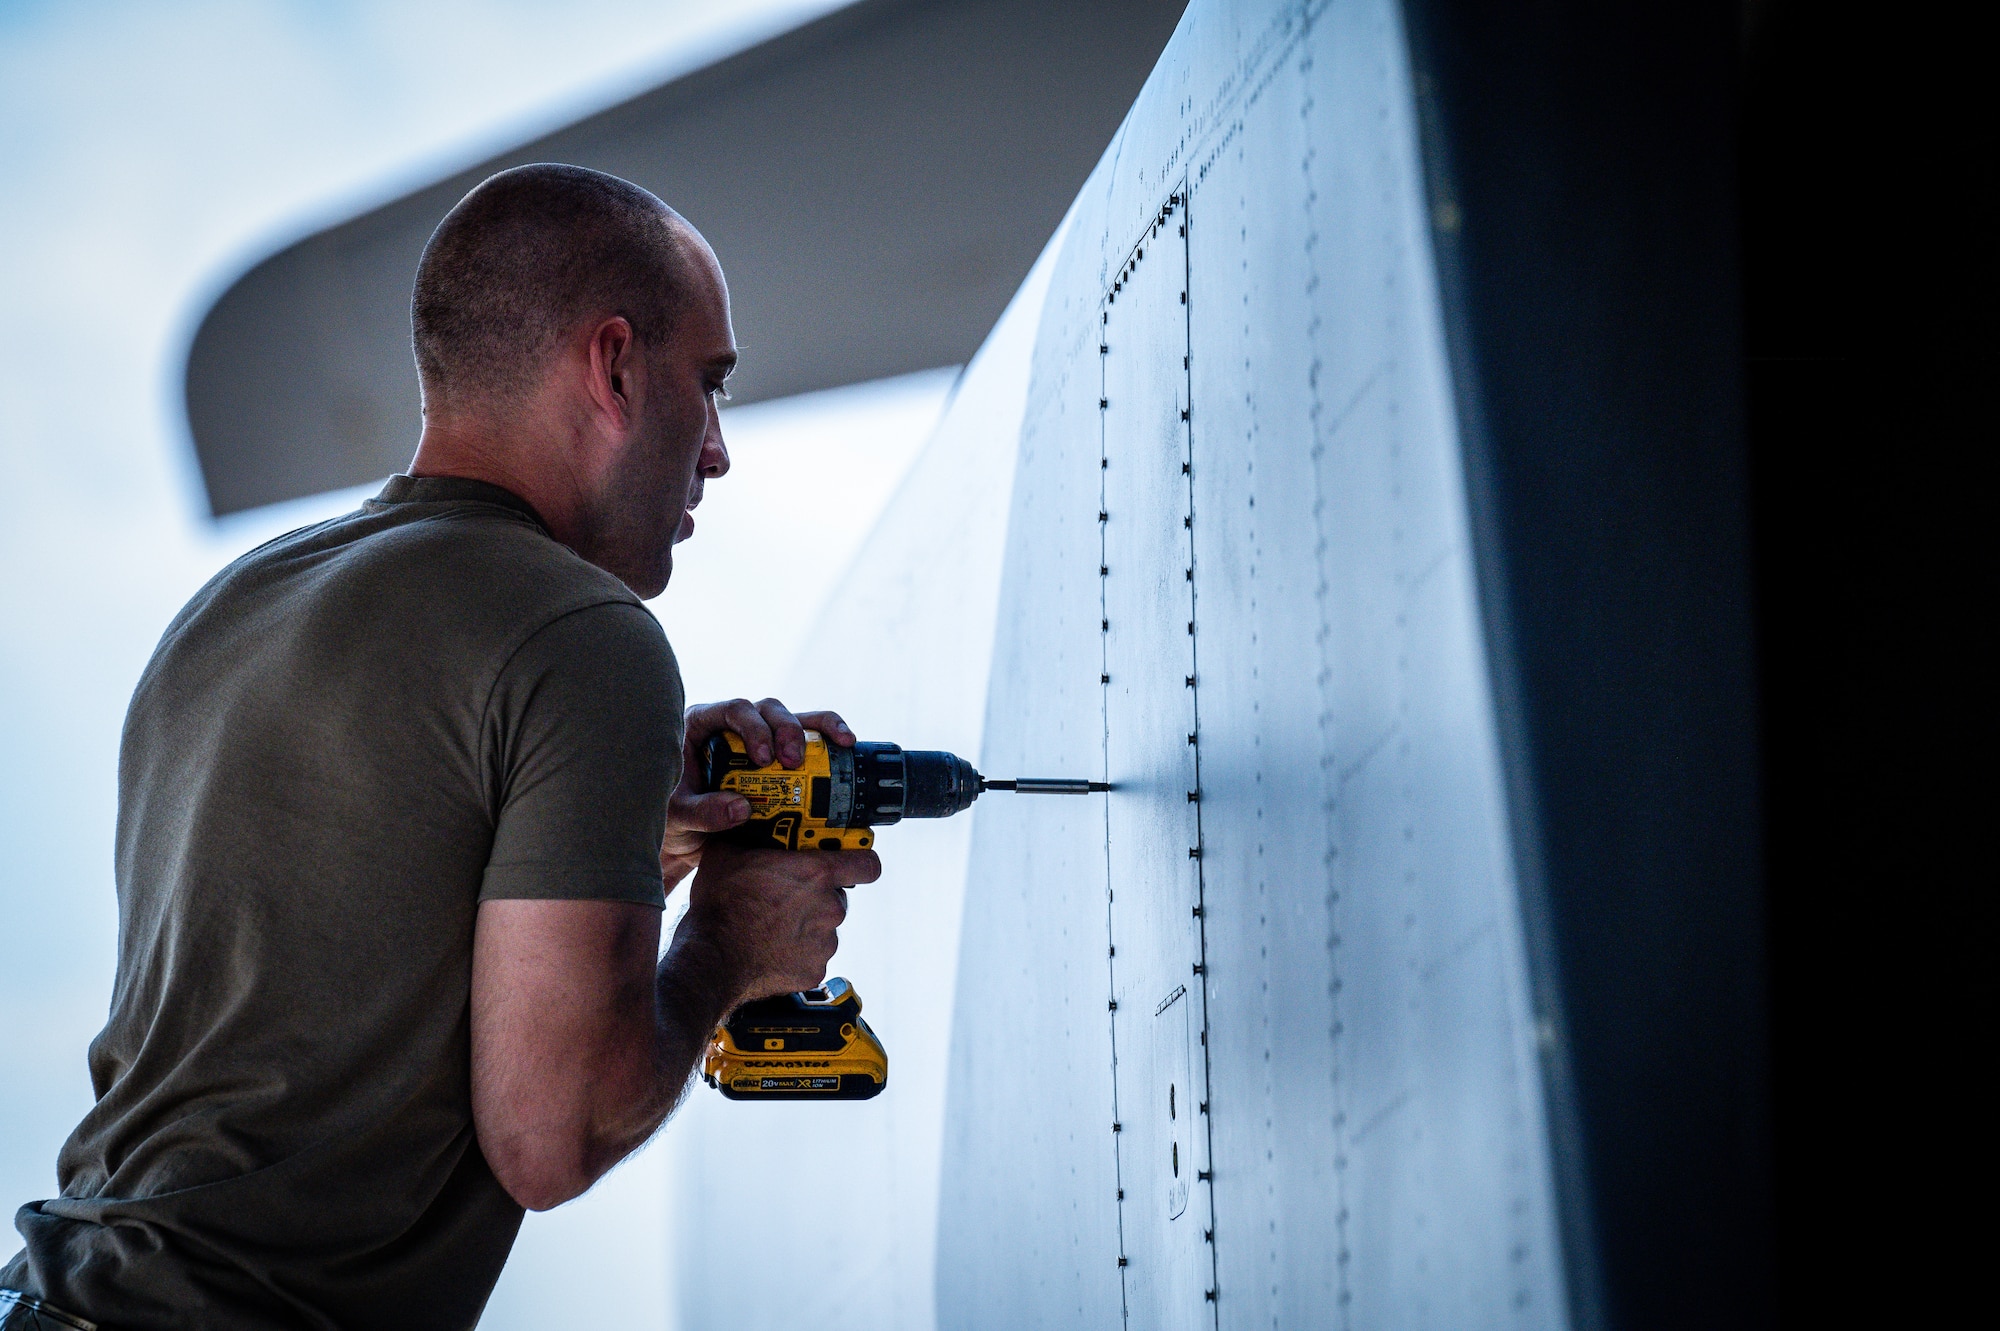 An Airman from Dyess Air Force Base, Texas, removes a panel from the rear of a B-1B Lancer at Barksdale Air Force Base, Louisiana, July 7, 2021.